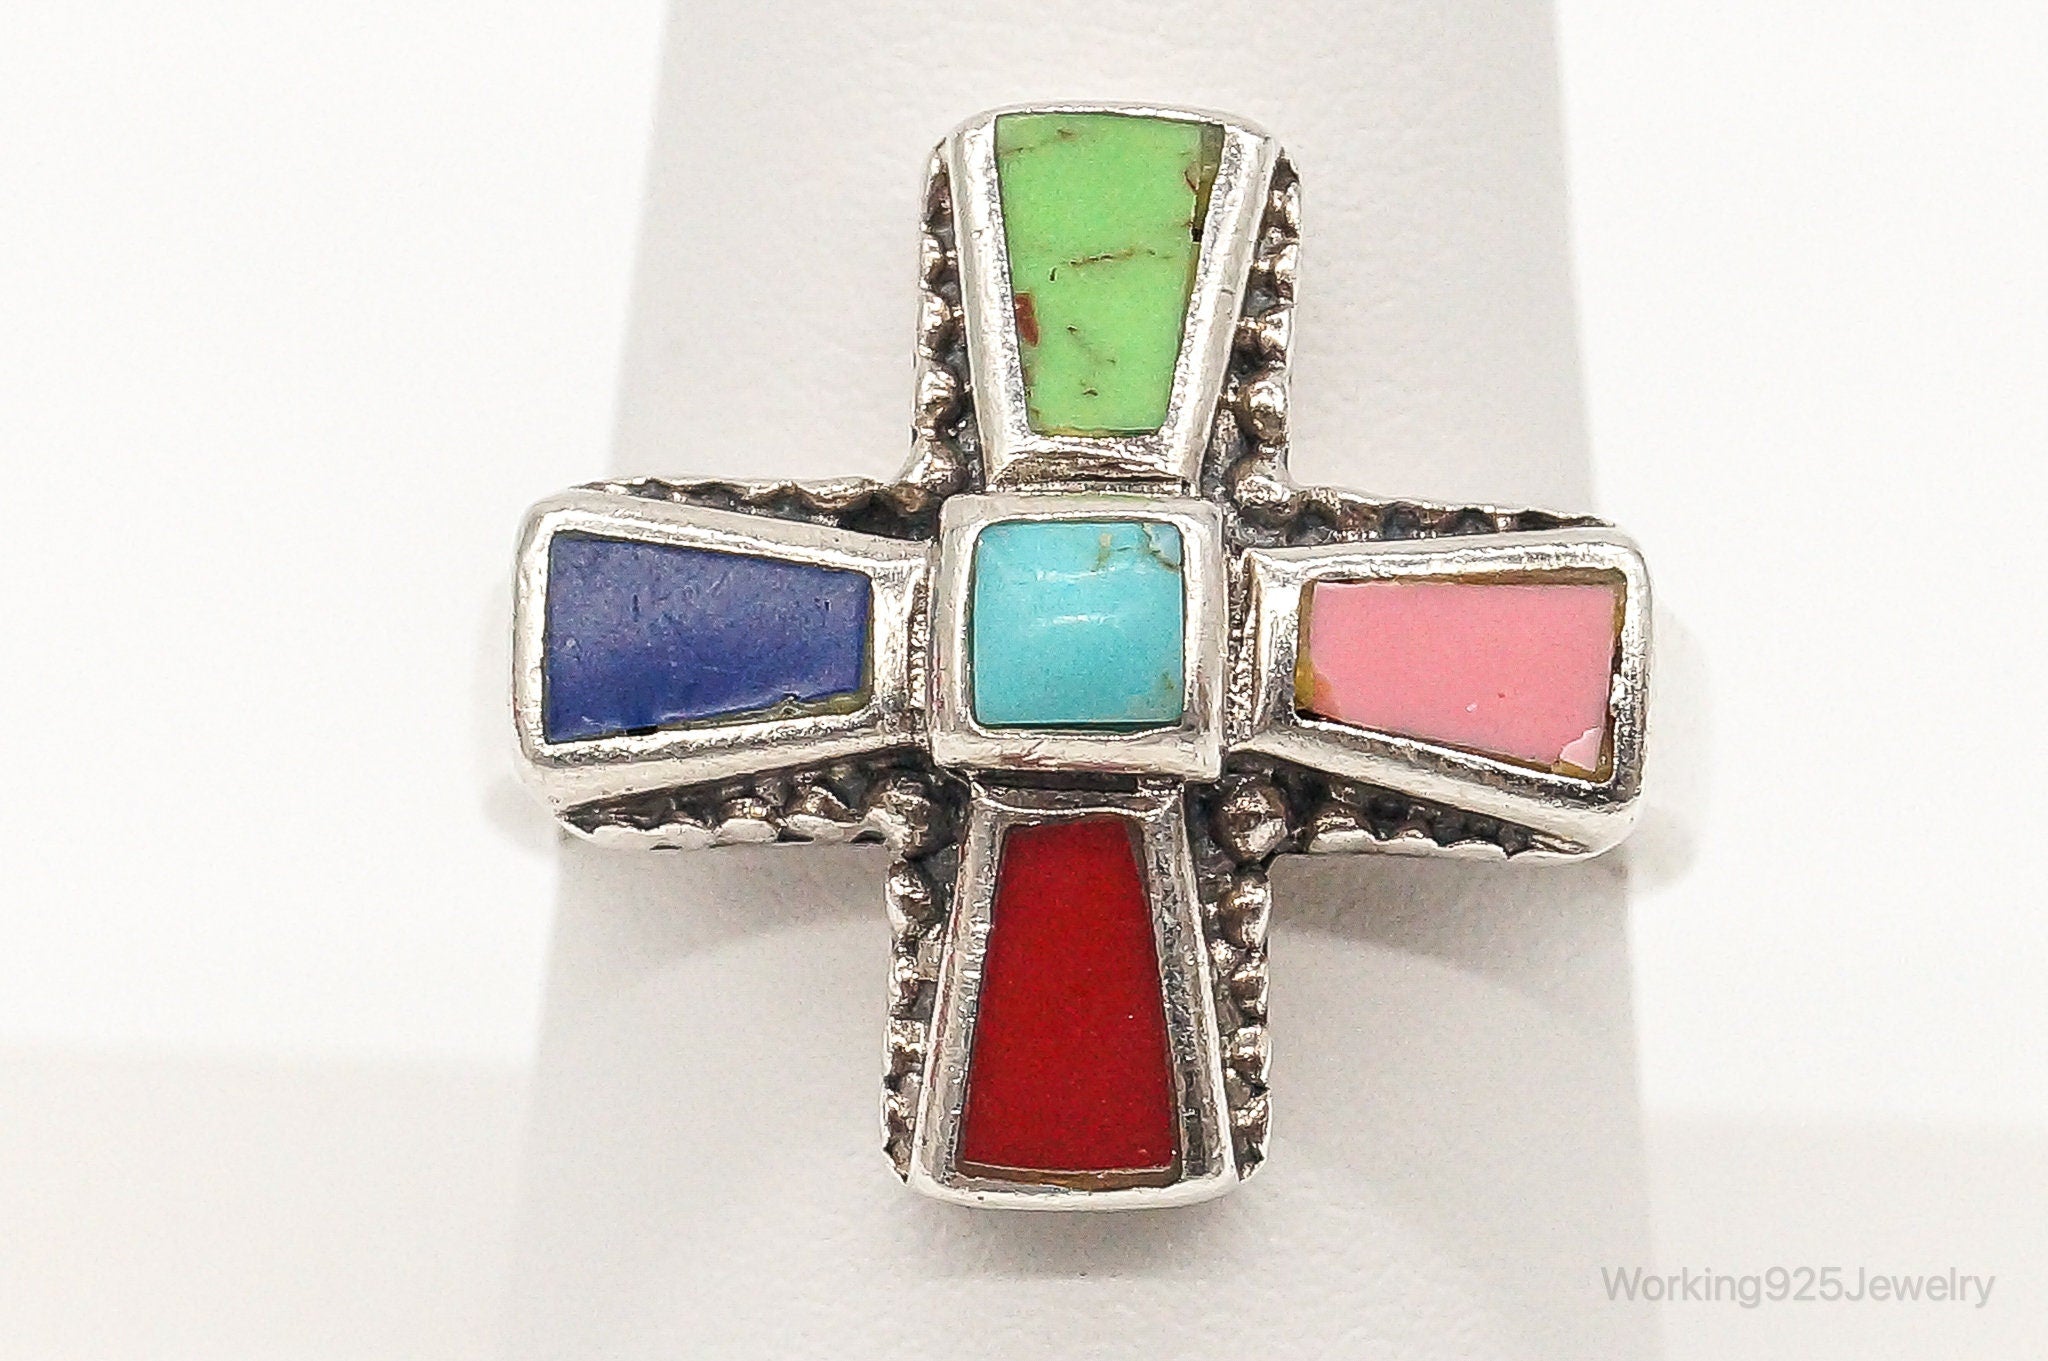 Vintage Turquoise Coral Lapis Lazuli Sterling Silver Ring - Size 8